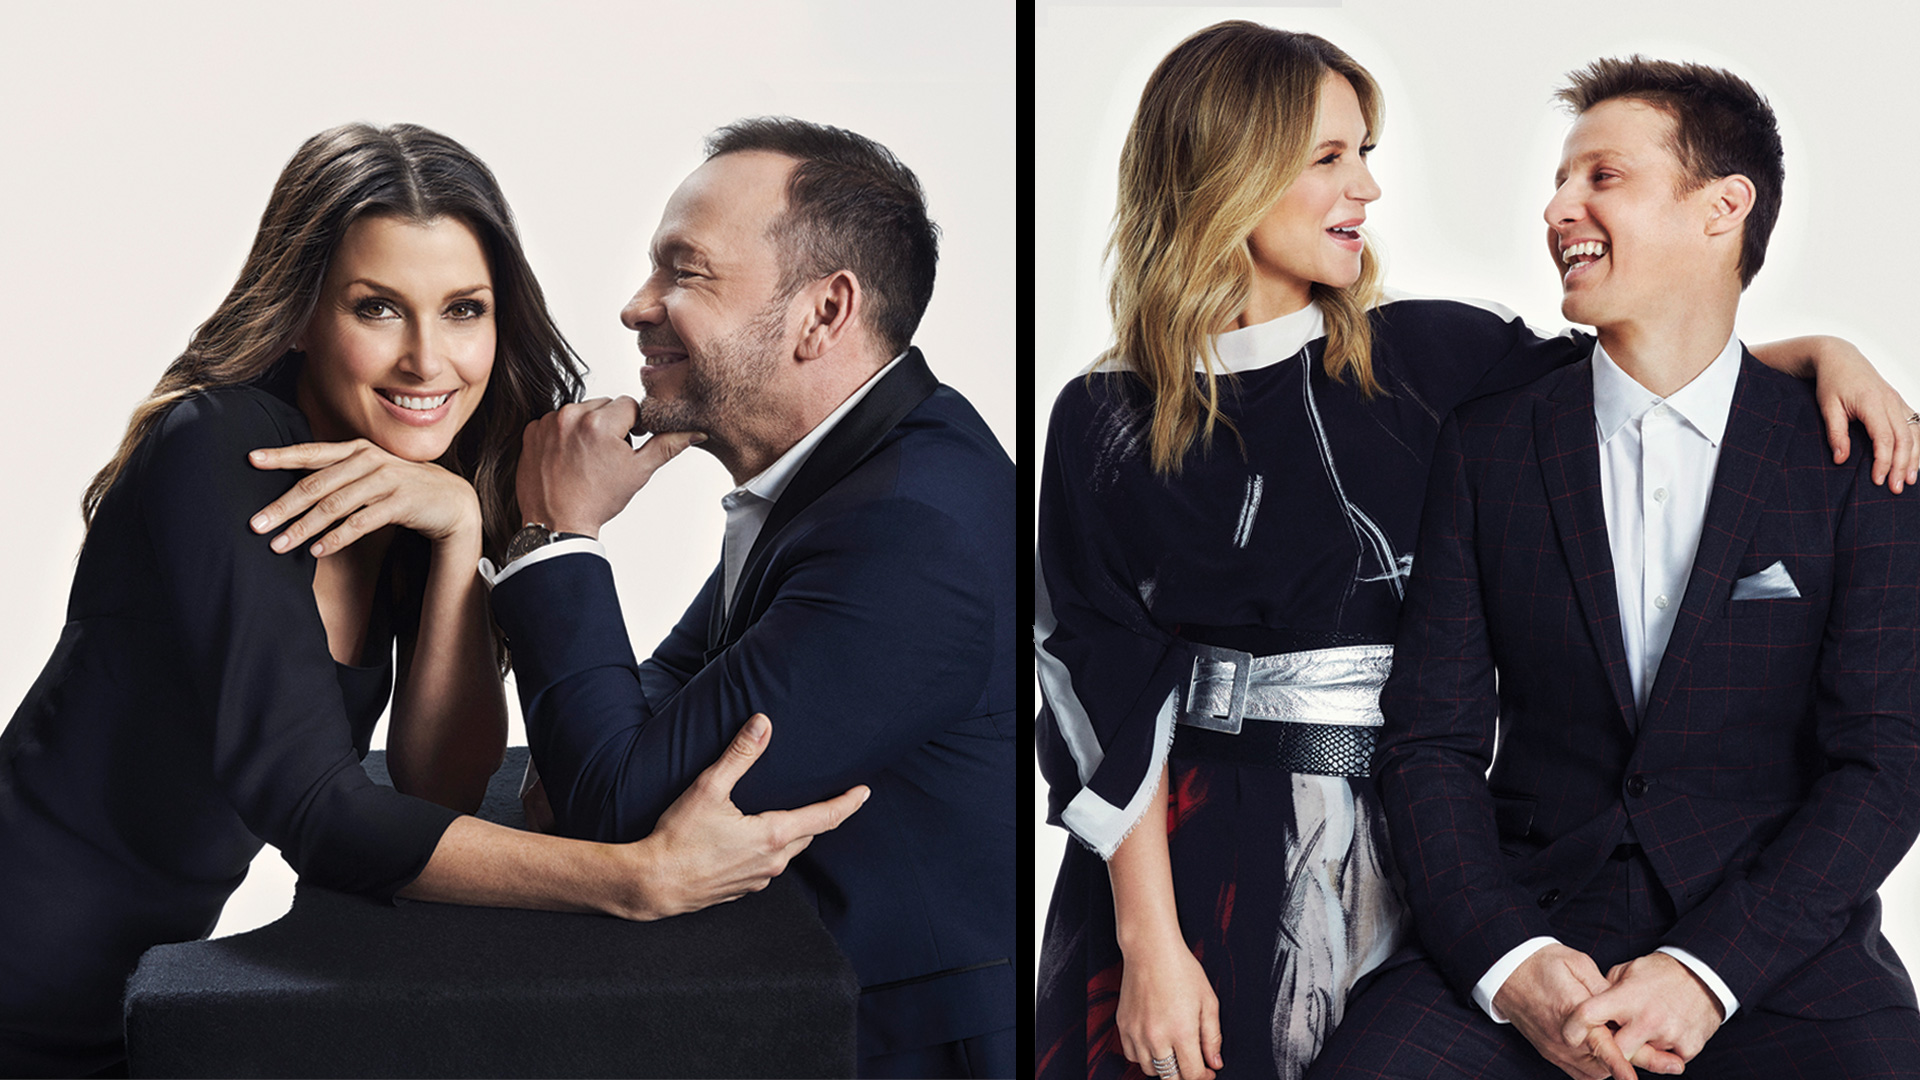 These stylish Blue Bloods stars clean up very nice in these exclusive photos!